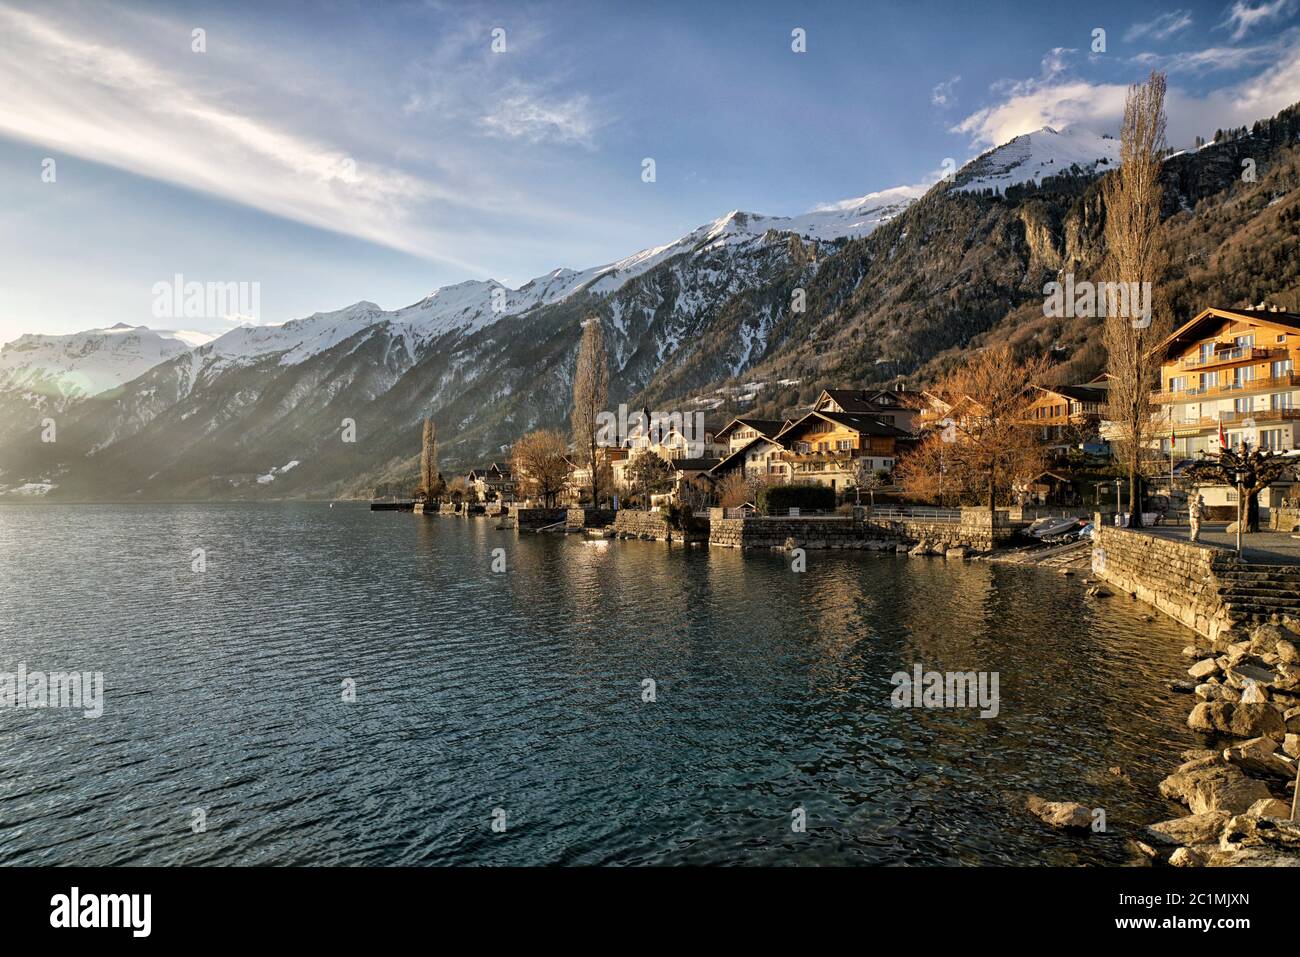 Evening at the Lake of Brienz Stock Photo